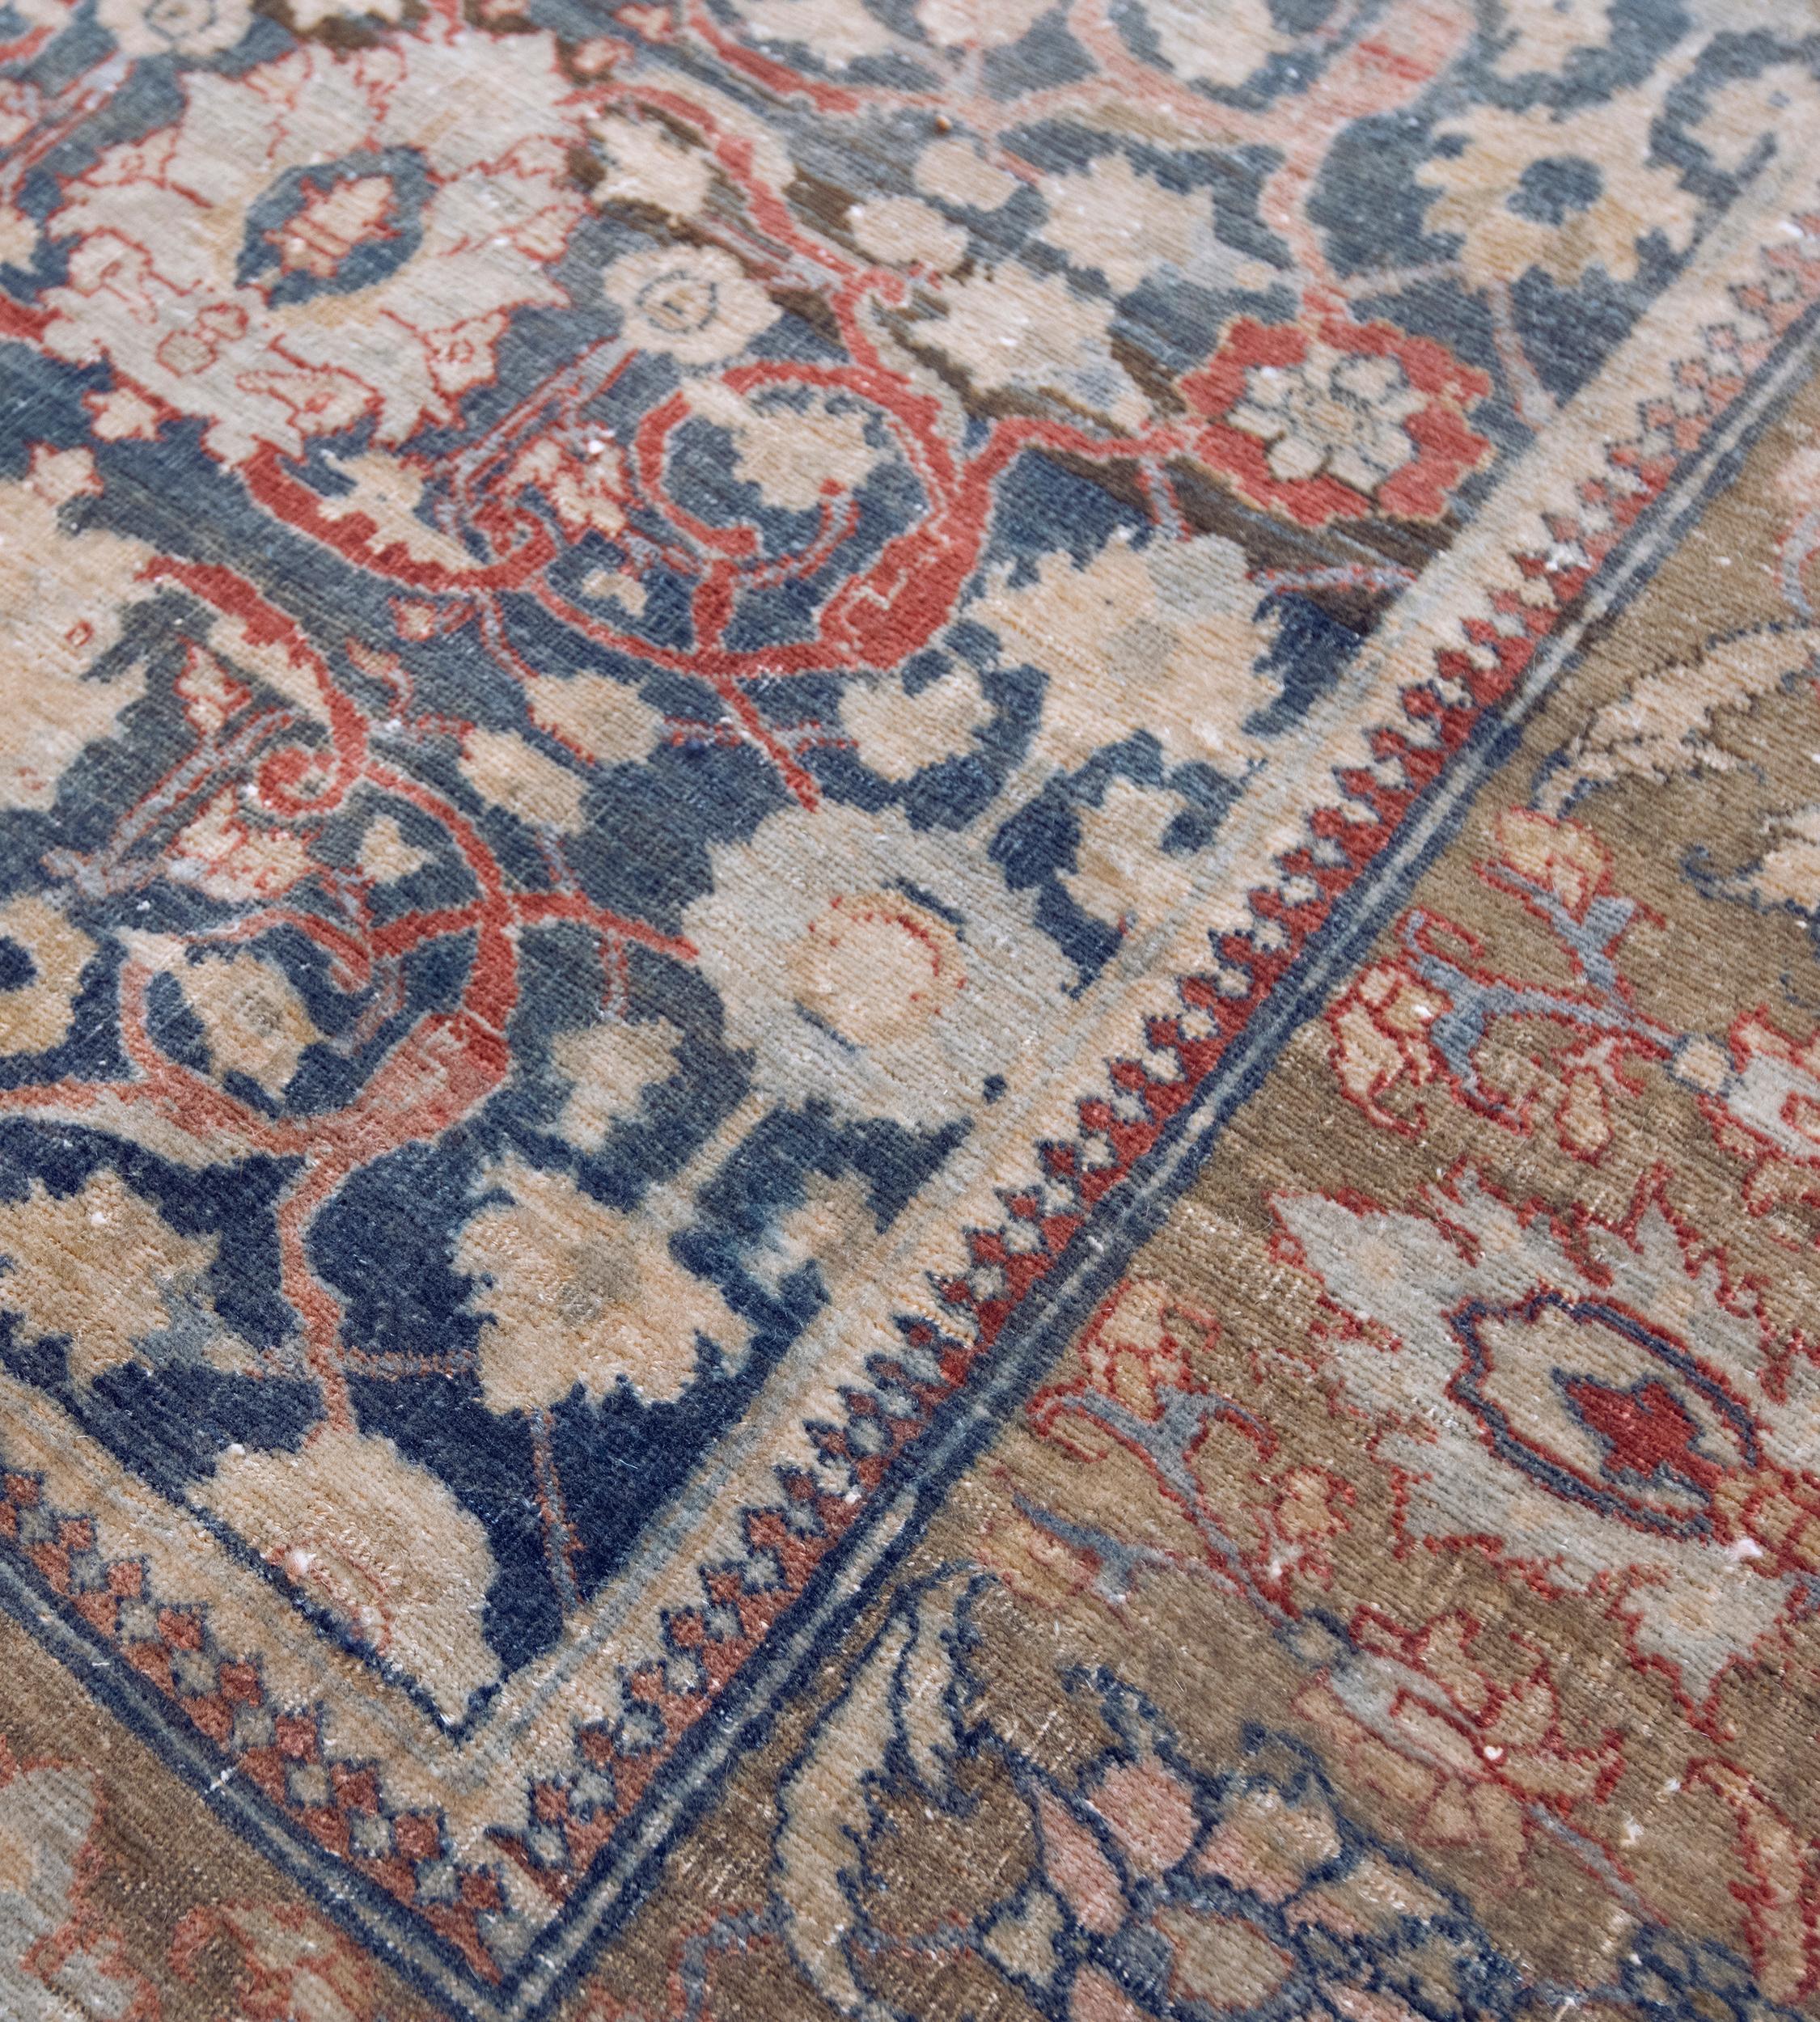 This traditional Tabriz runner has a shaded indigo-field with an overall design of shaded tomato-red vine linking bold light blue and buff-brown palmettes and delicate floral vine stripes, in a broad Khaki-green border of bold polychrome palmettes